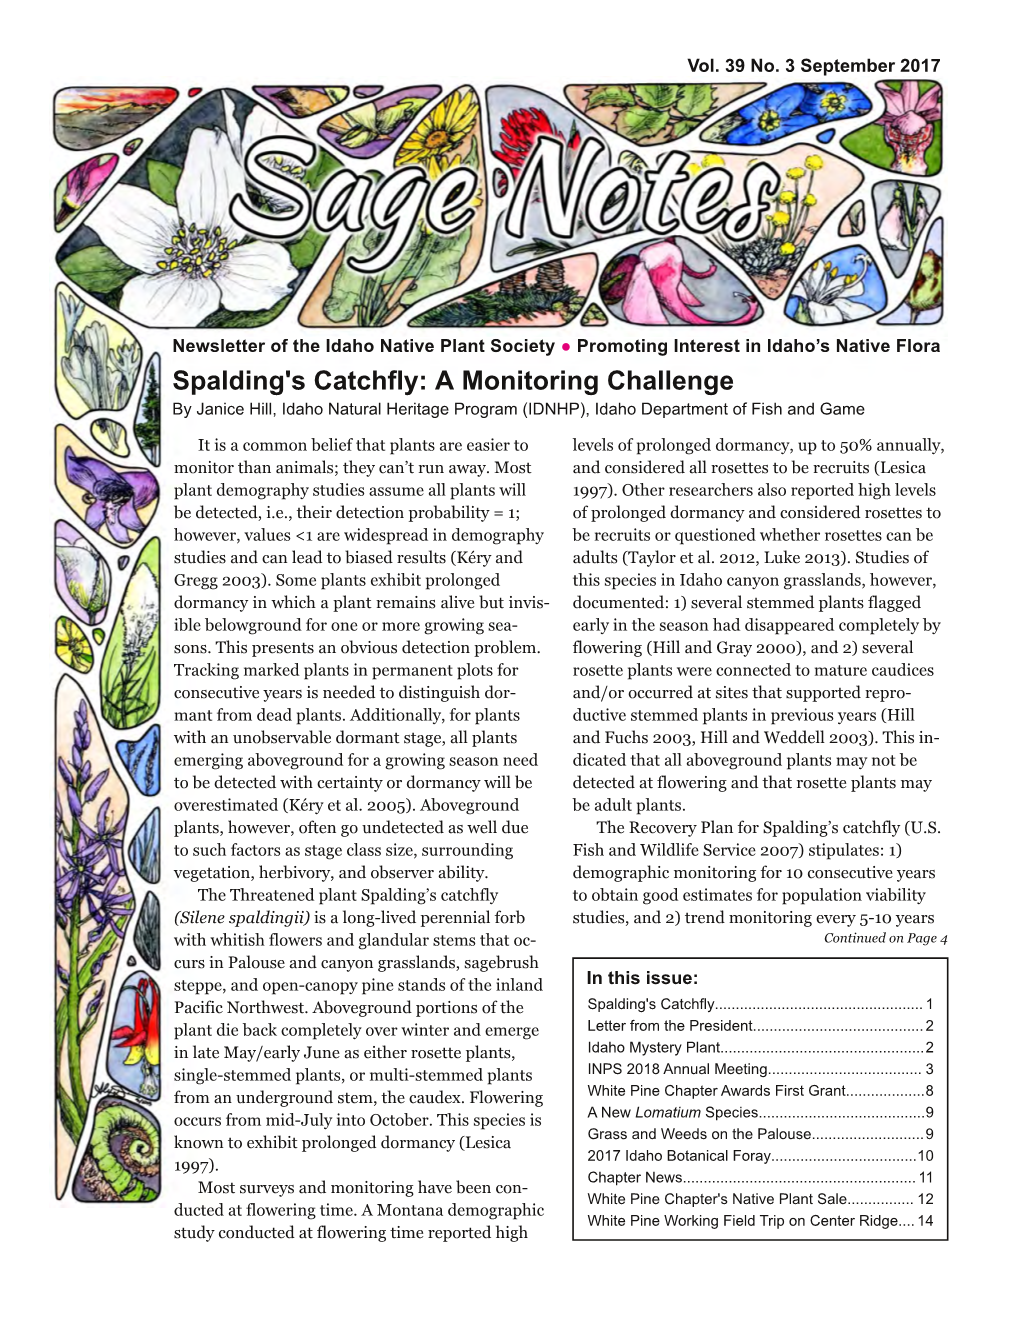 Spalding's Catchfly: a Monitoring Challenge by Janice Hill, Idaho Natural Heritage Program (IDNHP), Idaho Department of Fish and Game